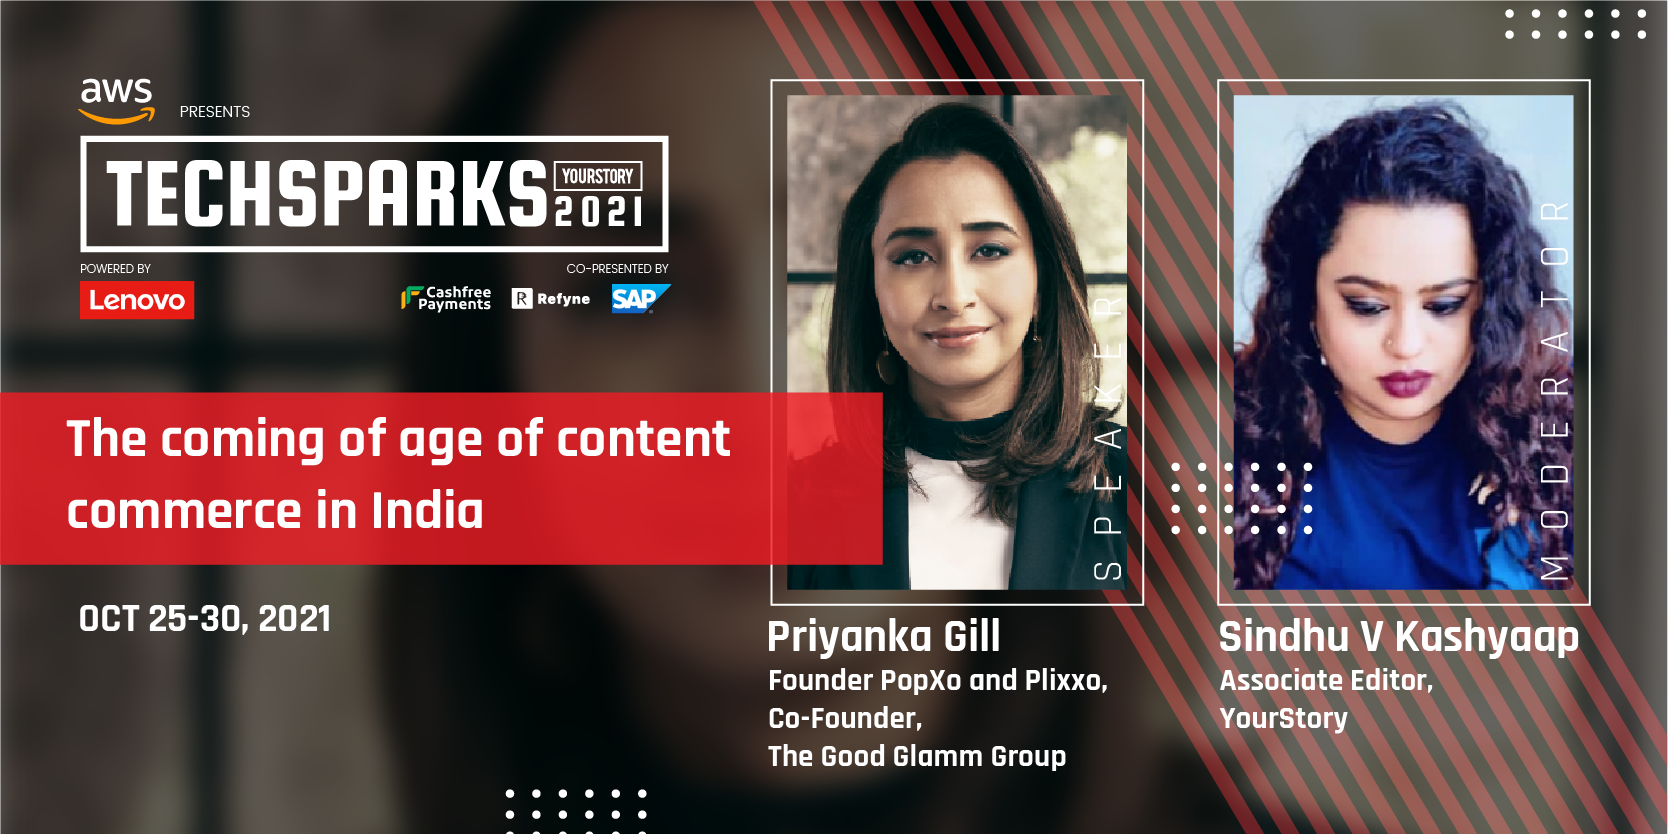 The best way to merge content and commerce to bring in D2C potential is to do it with authenticity: Priyanka Gill